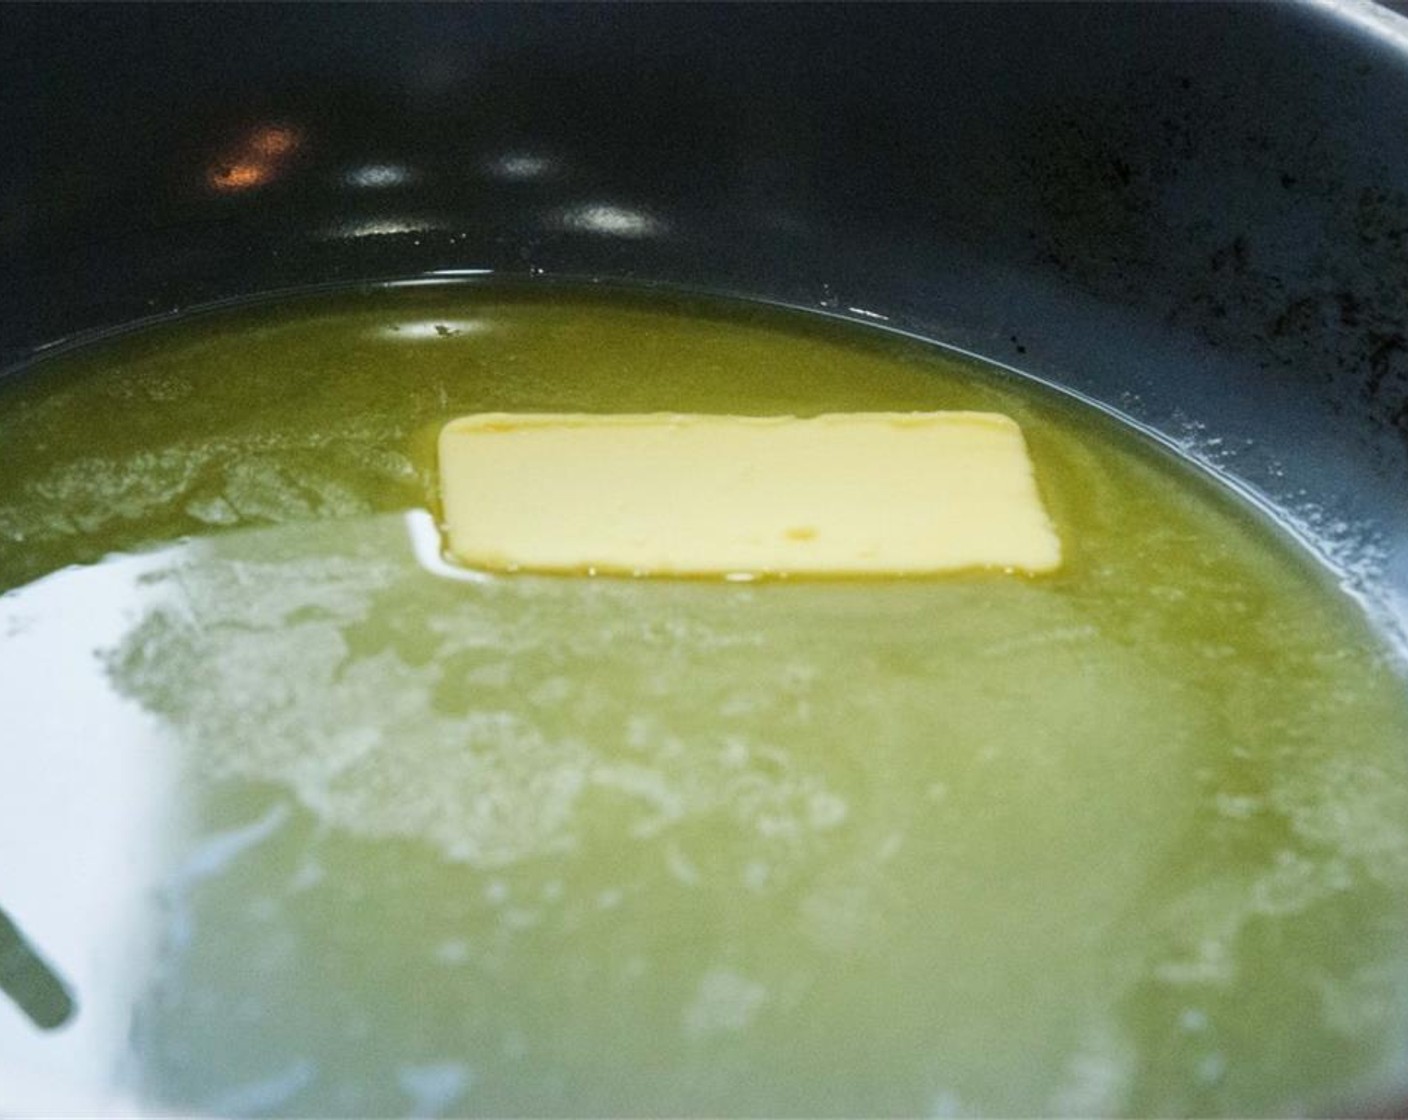 step 2 In a skillet, melt the Butter (2 Tbsp) and slowly add the Granulated Sugar (2 Tbsp). Stir until the sugar is all dissolved.